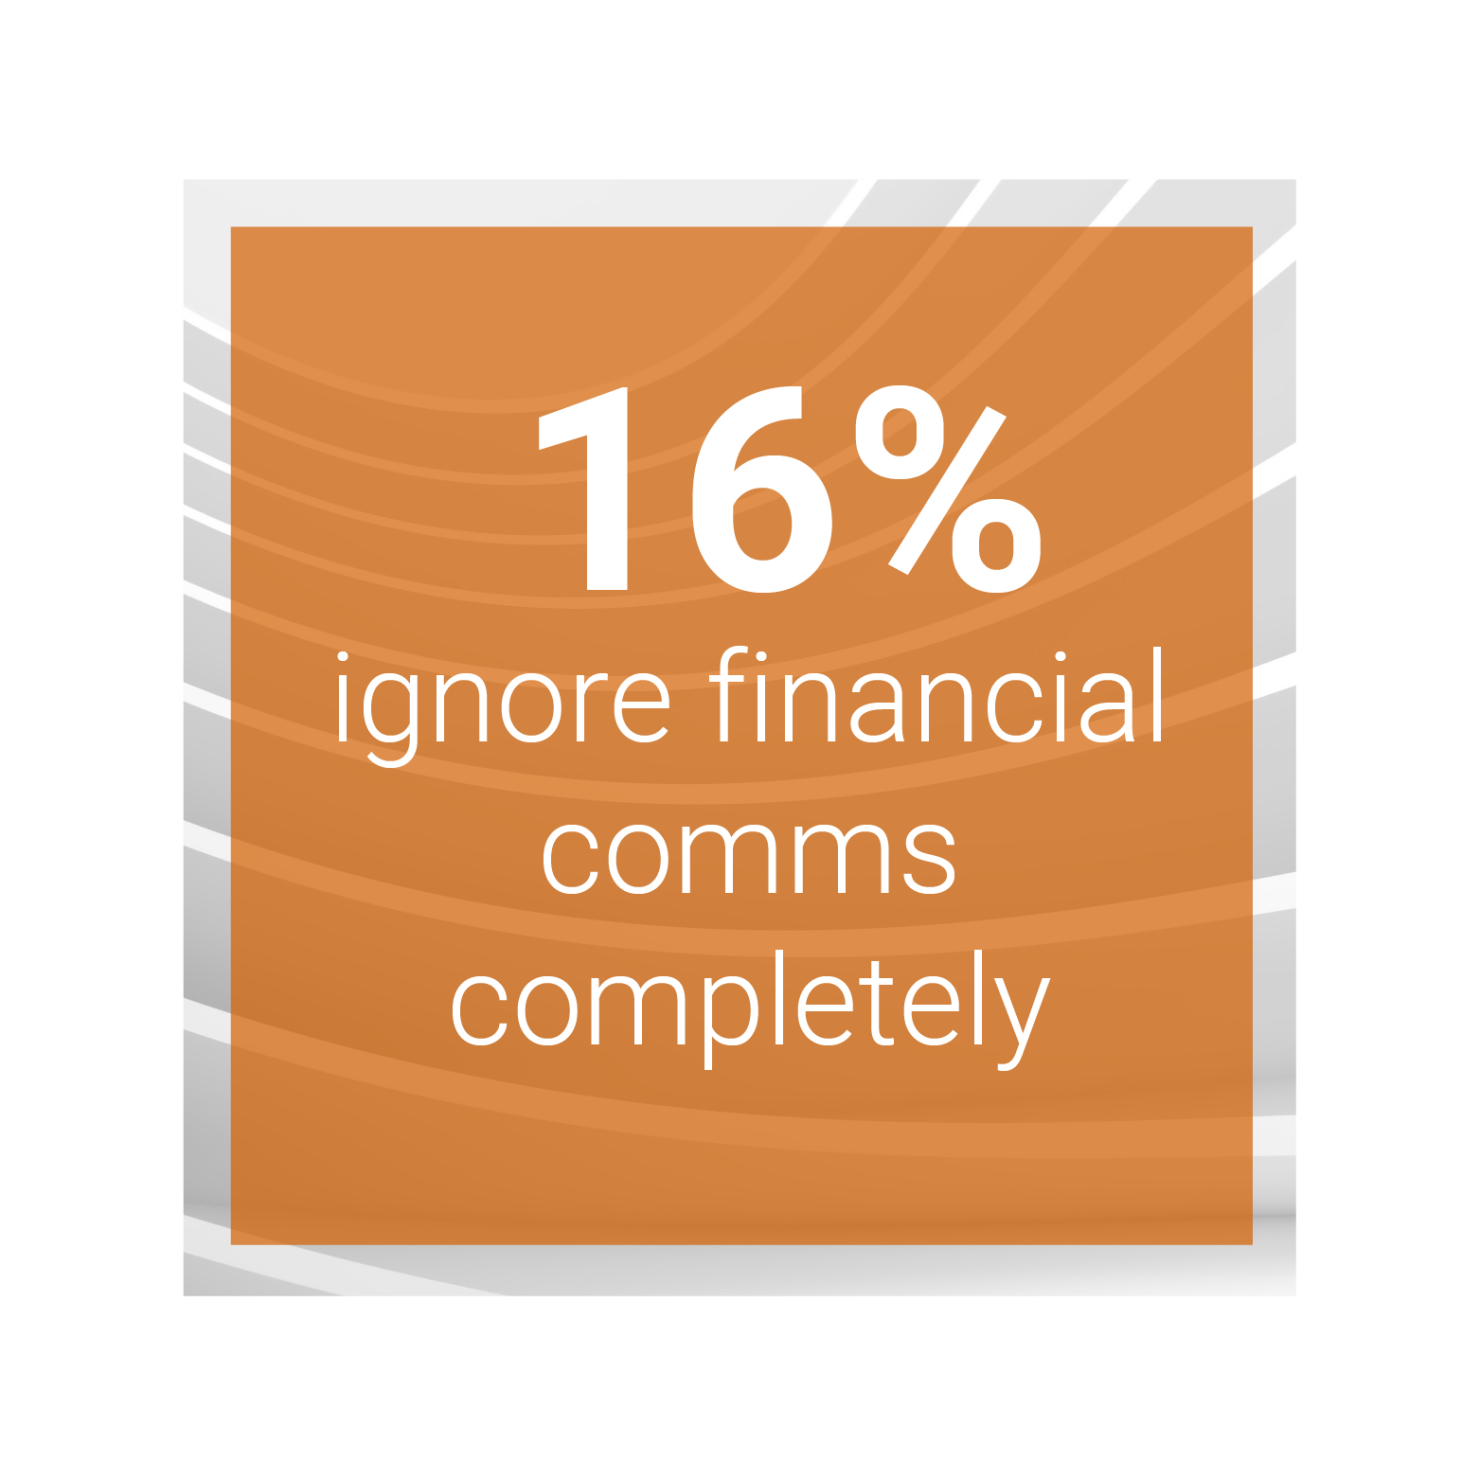 16% ignore financial comms completely